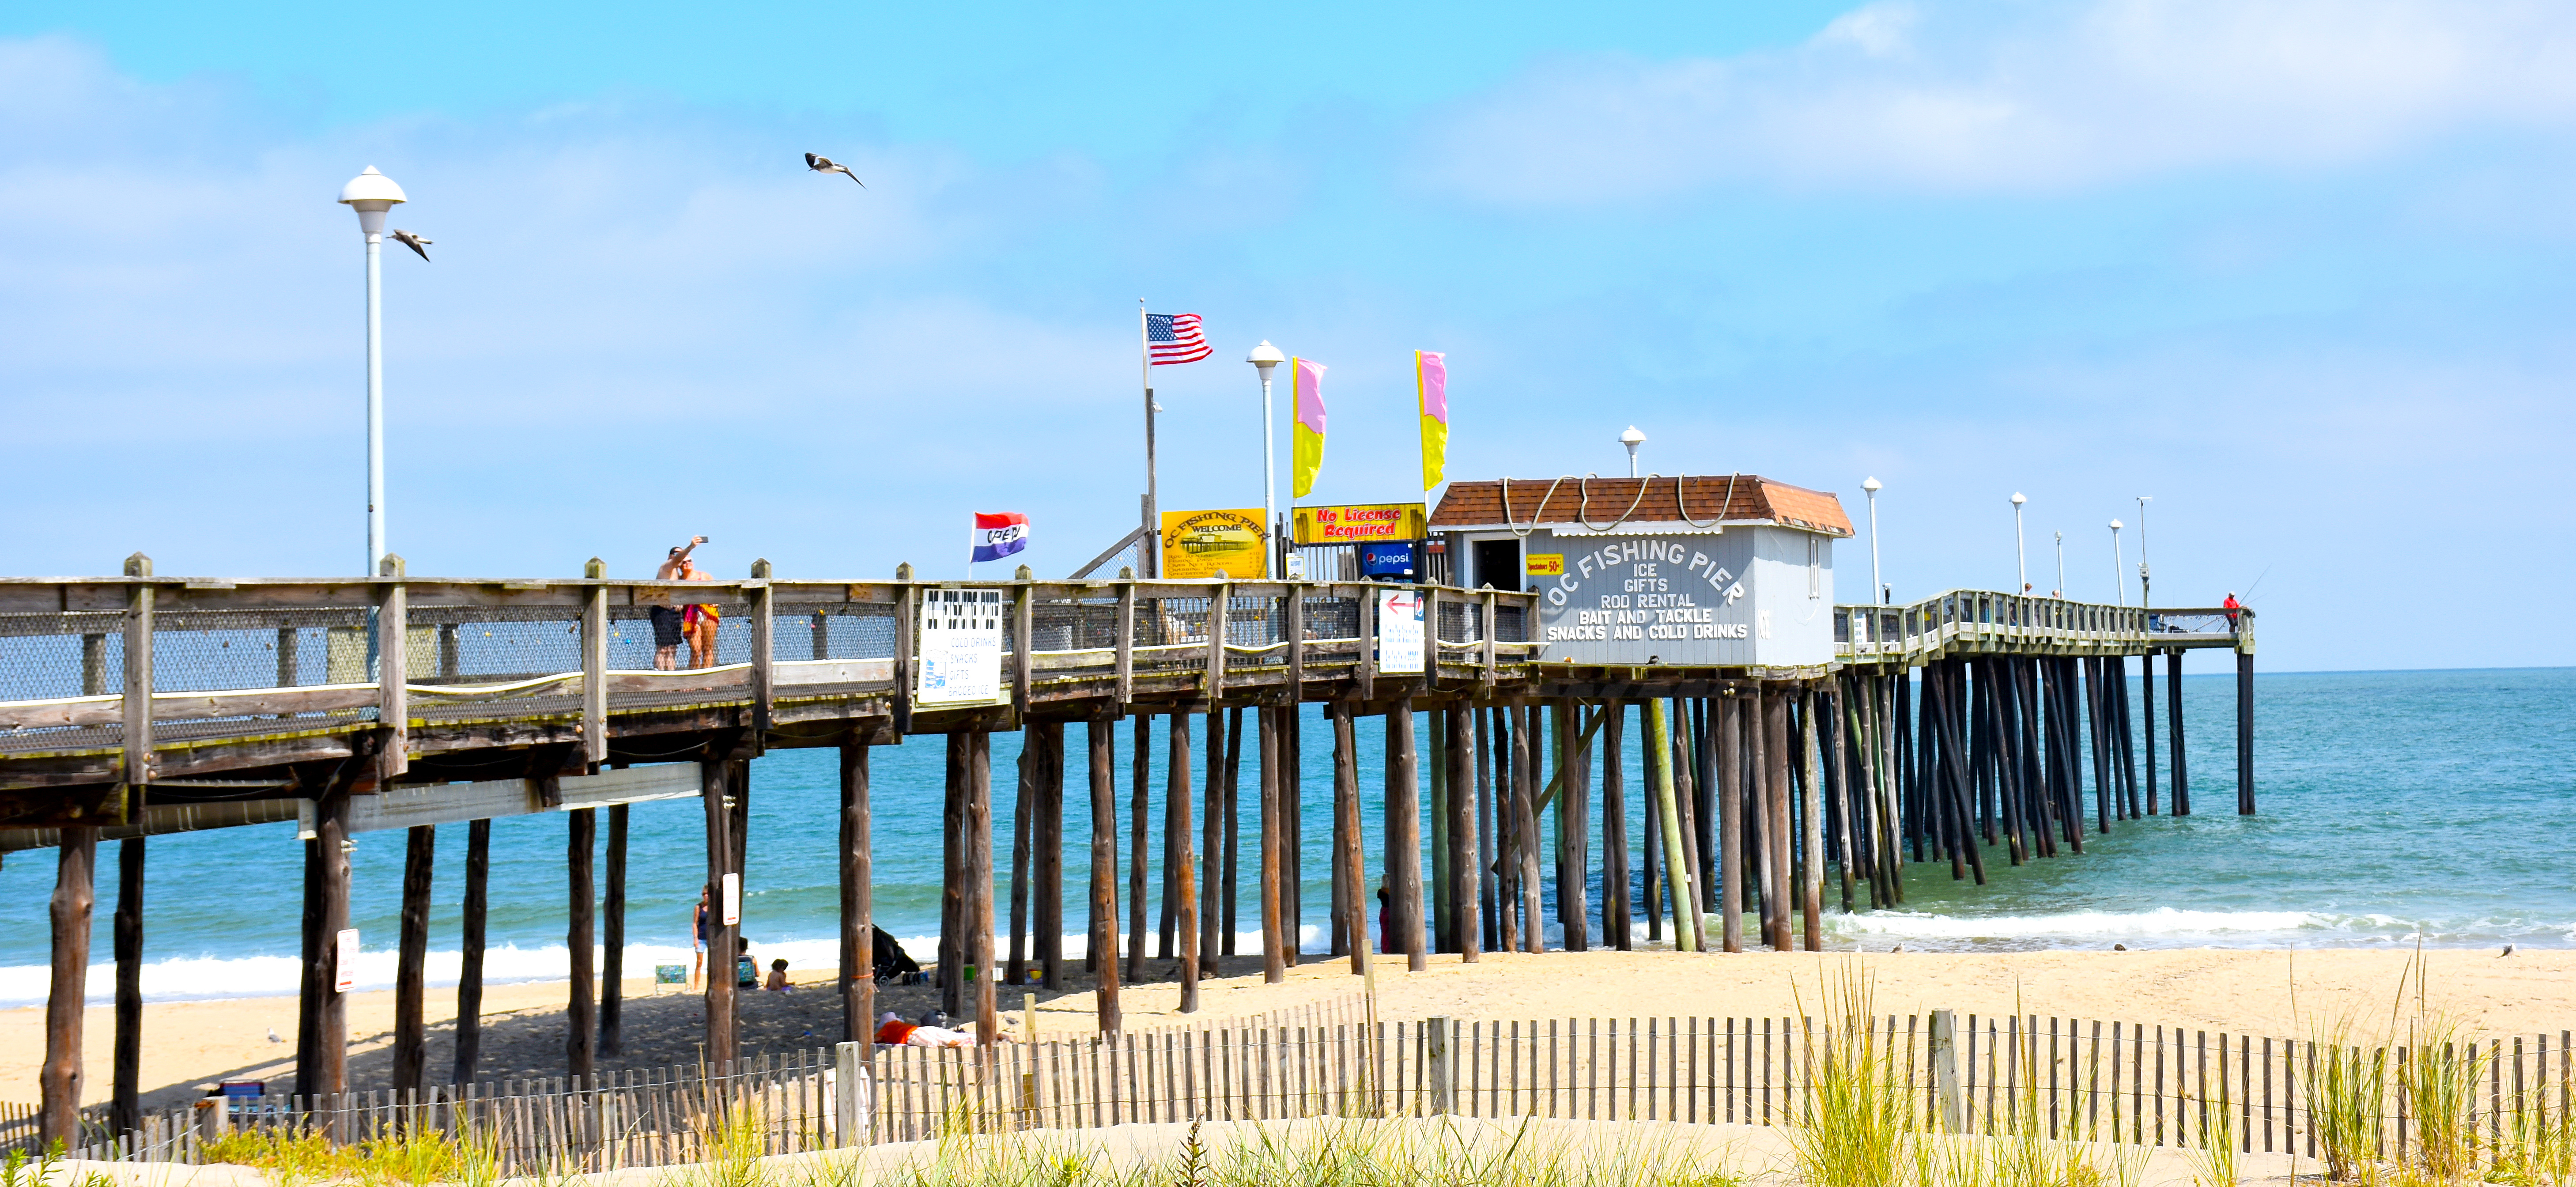 The Ocean City Fishing Pier near the inlet in Ocean City, Maryland